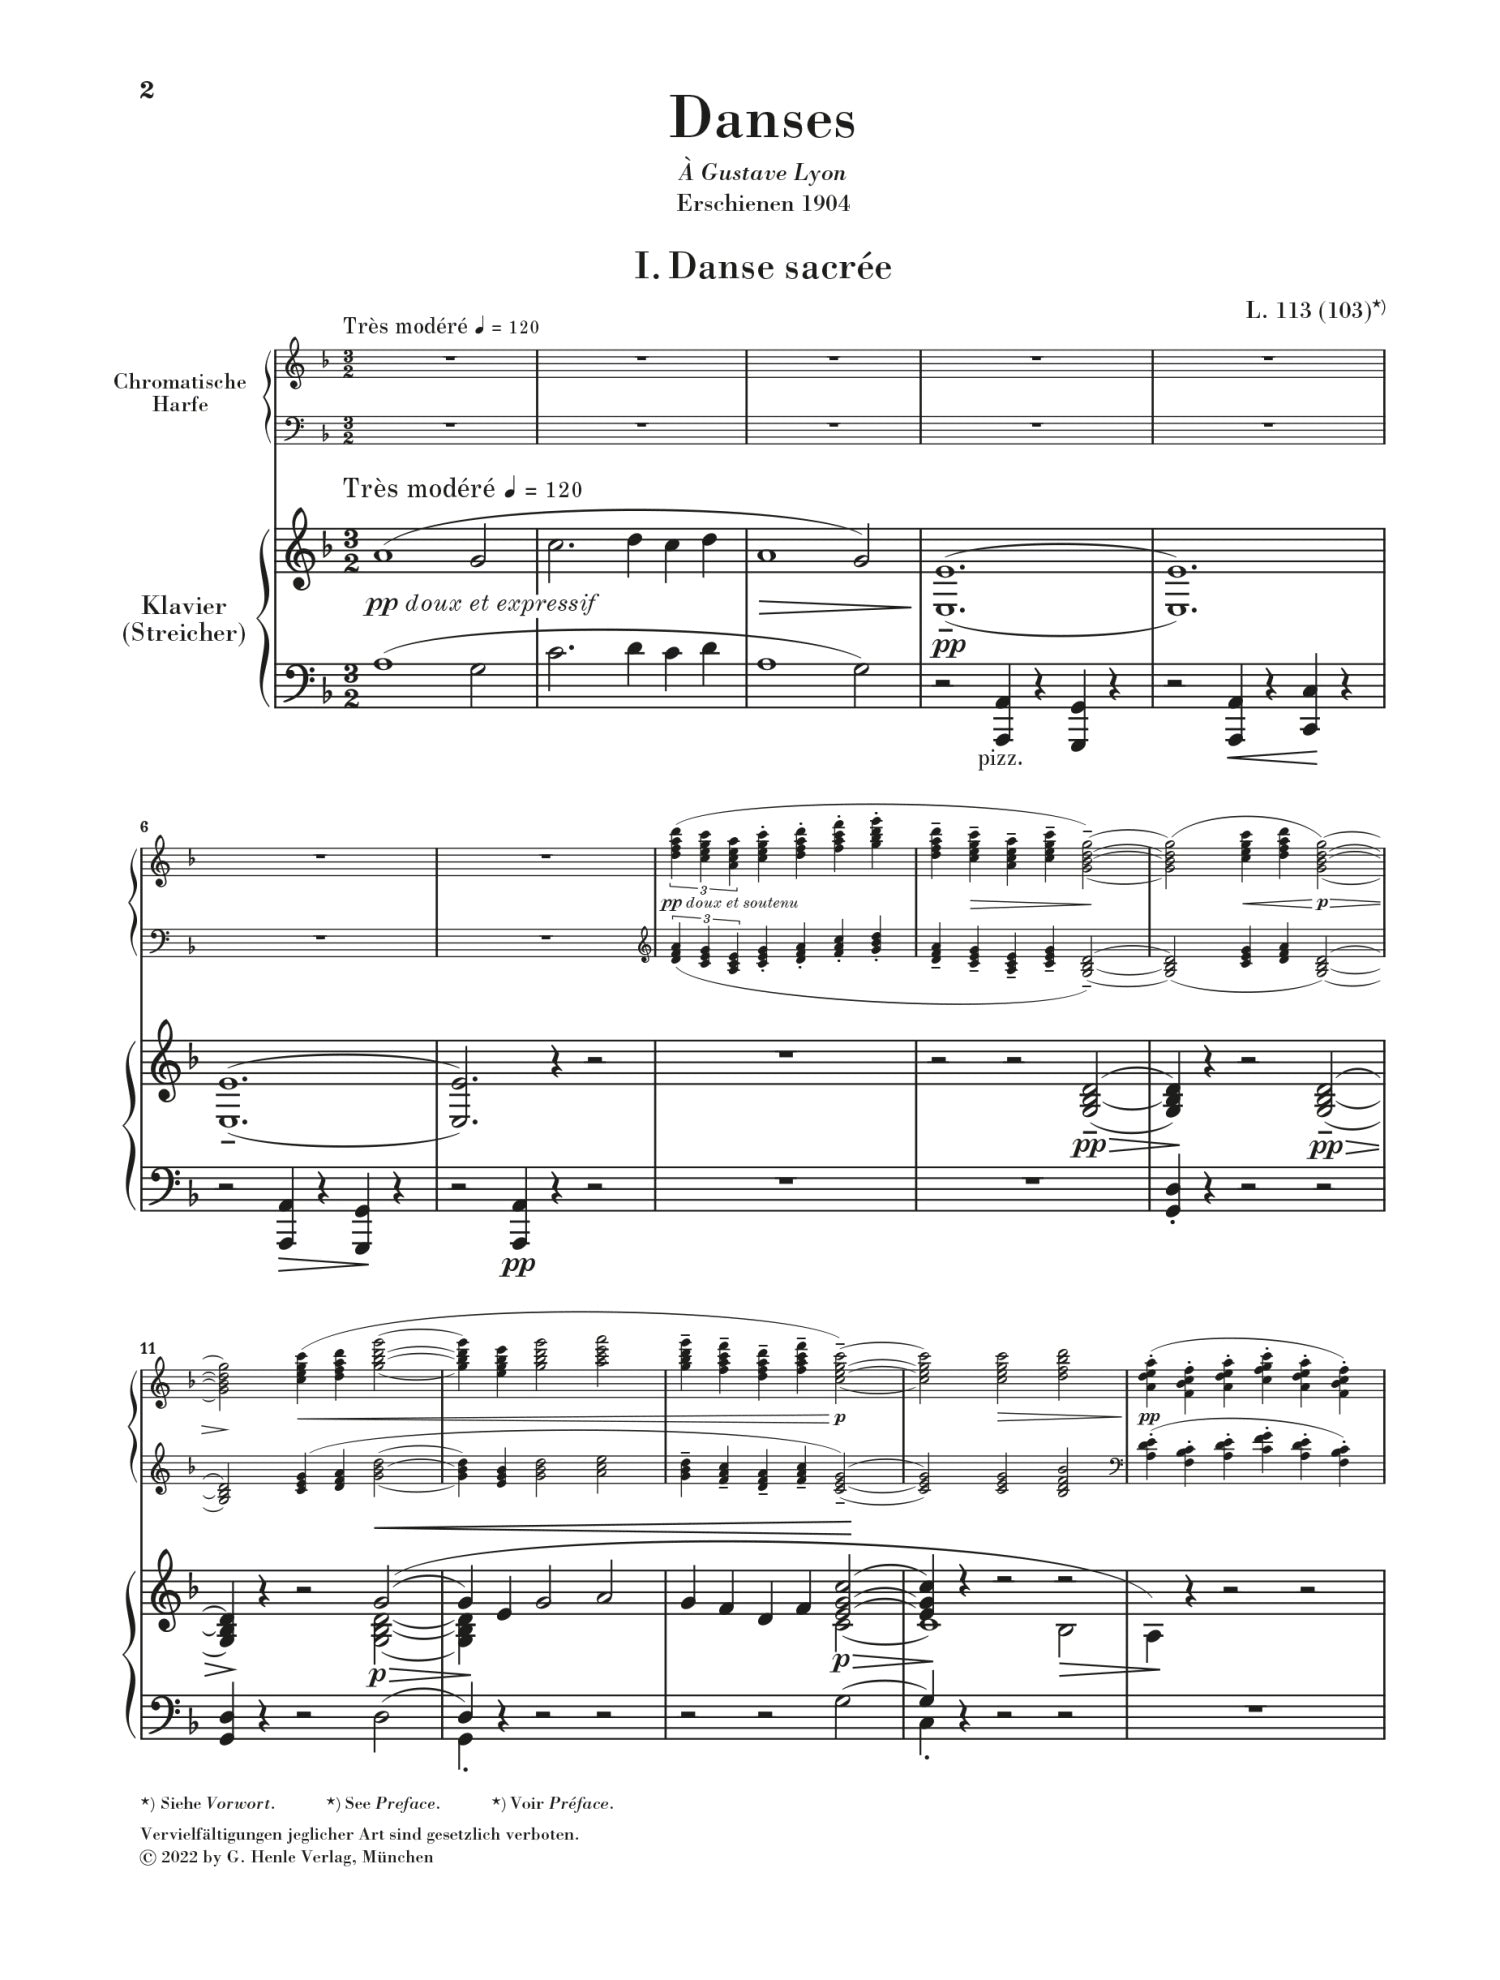 Debussy: Danses for Harp and String Orchestra (Piano Reduction)